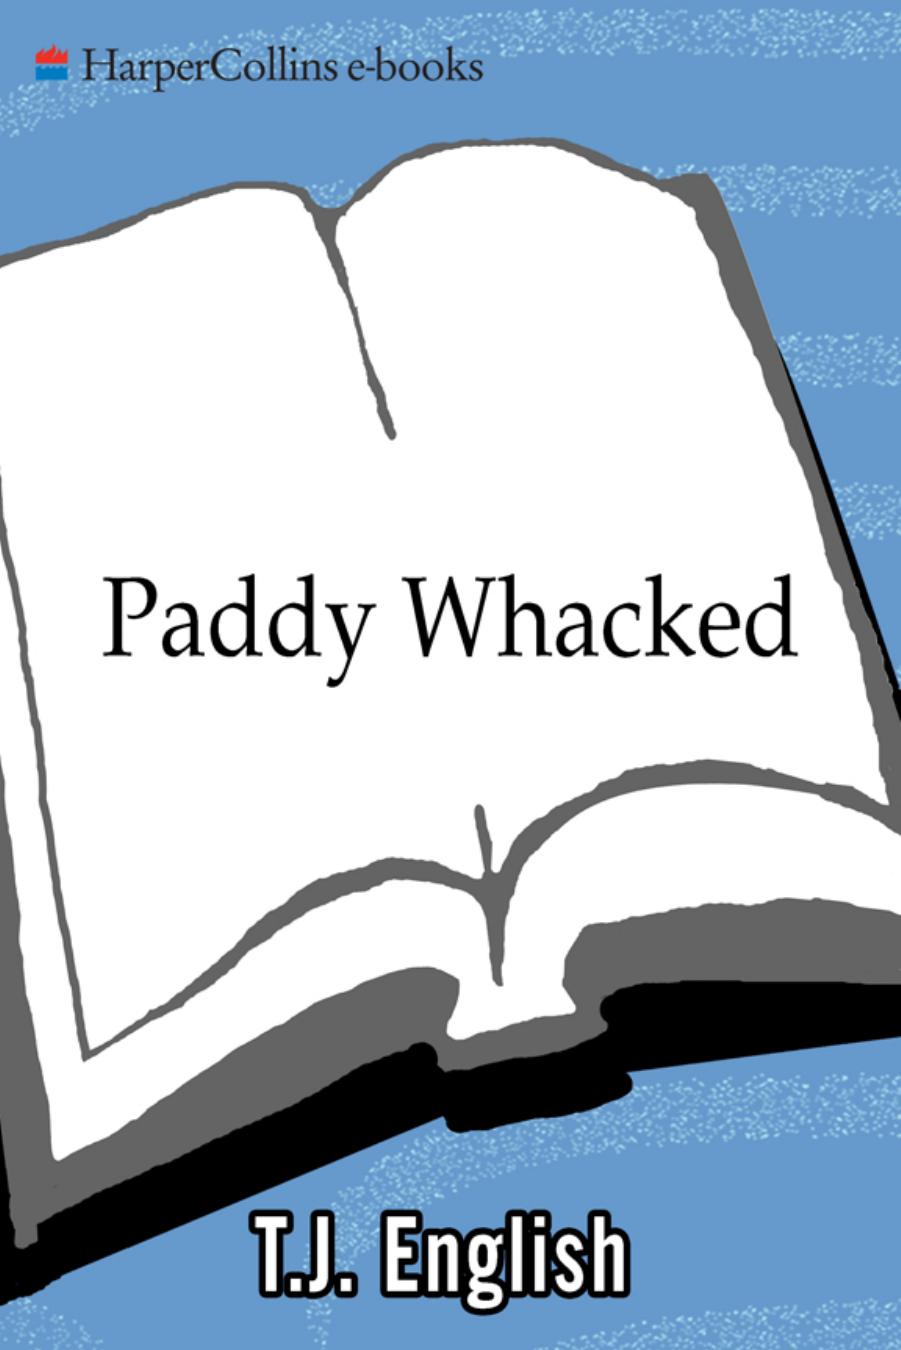 Paddy Whacked: The Untold Story of the Irish American Gangster by English T. J